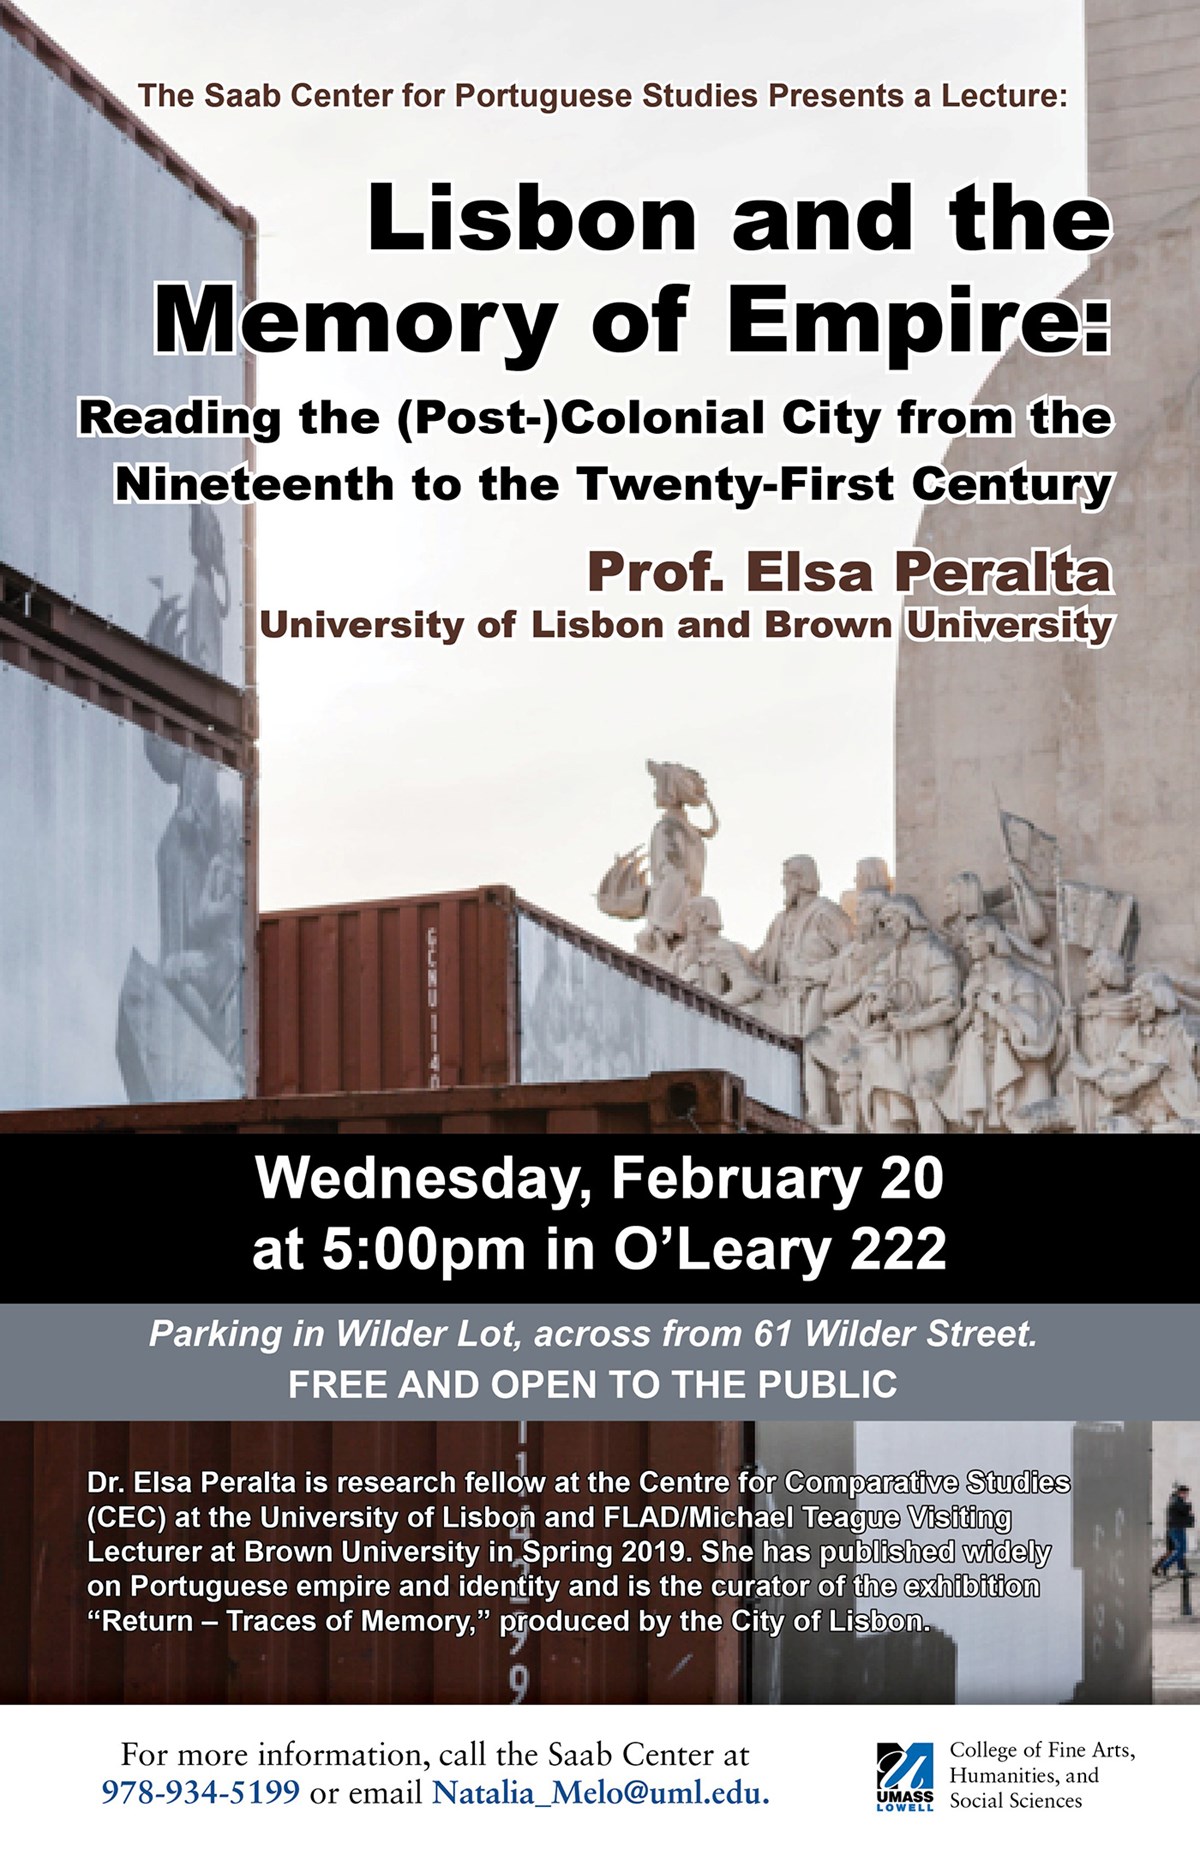 Poster for: Lecture on Lisbon and the Memory of Empire: Reading the (Post-)Colonial City from the Nineteenth to the Twenty-First Century by Prof. Elsa Peralta, University of Lisbon and Brown University at UMass Lowell's O'Leary Library on Wednesday, February 20, 2019 at 5 p.m.